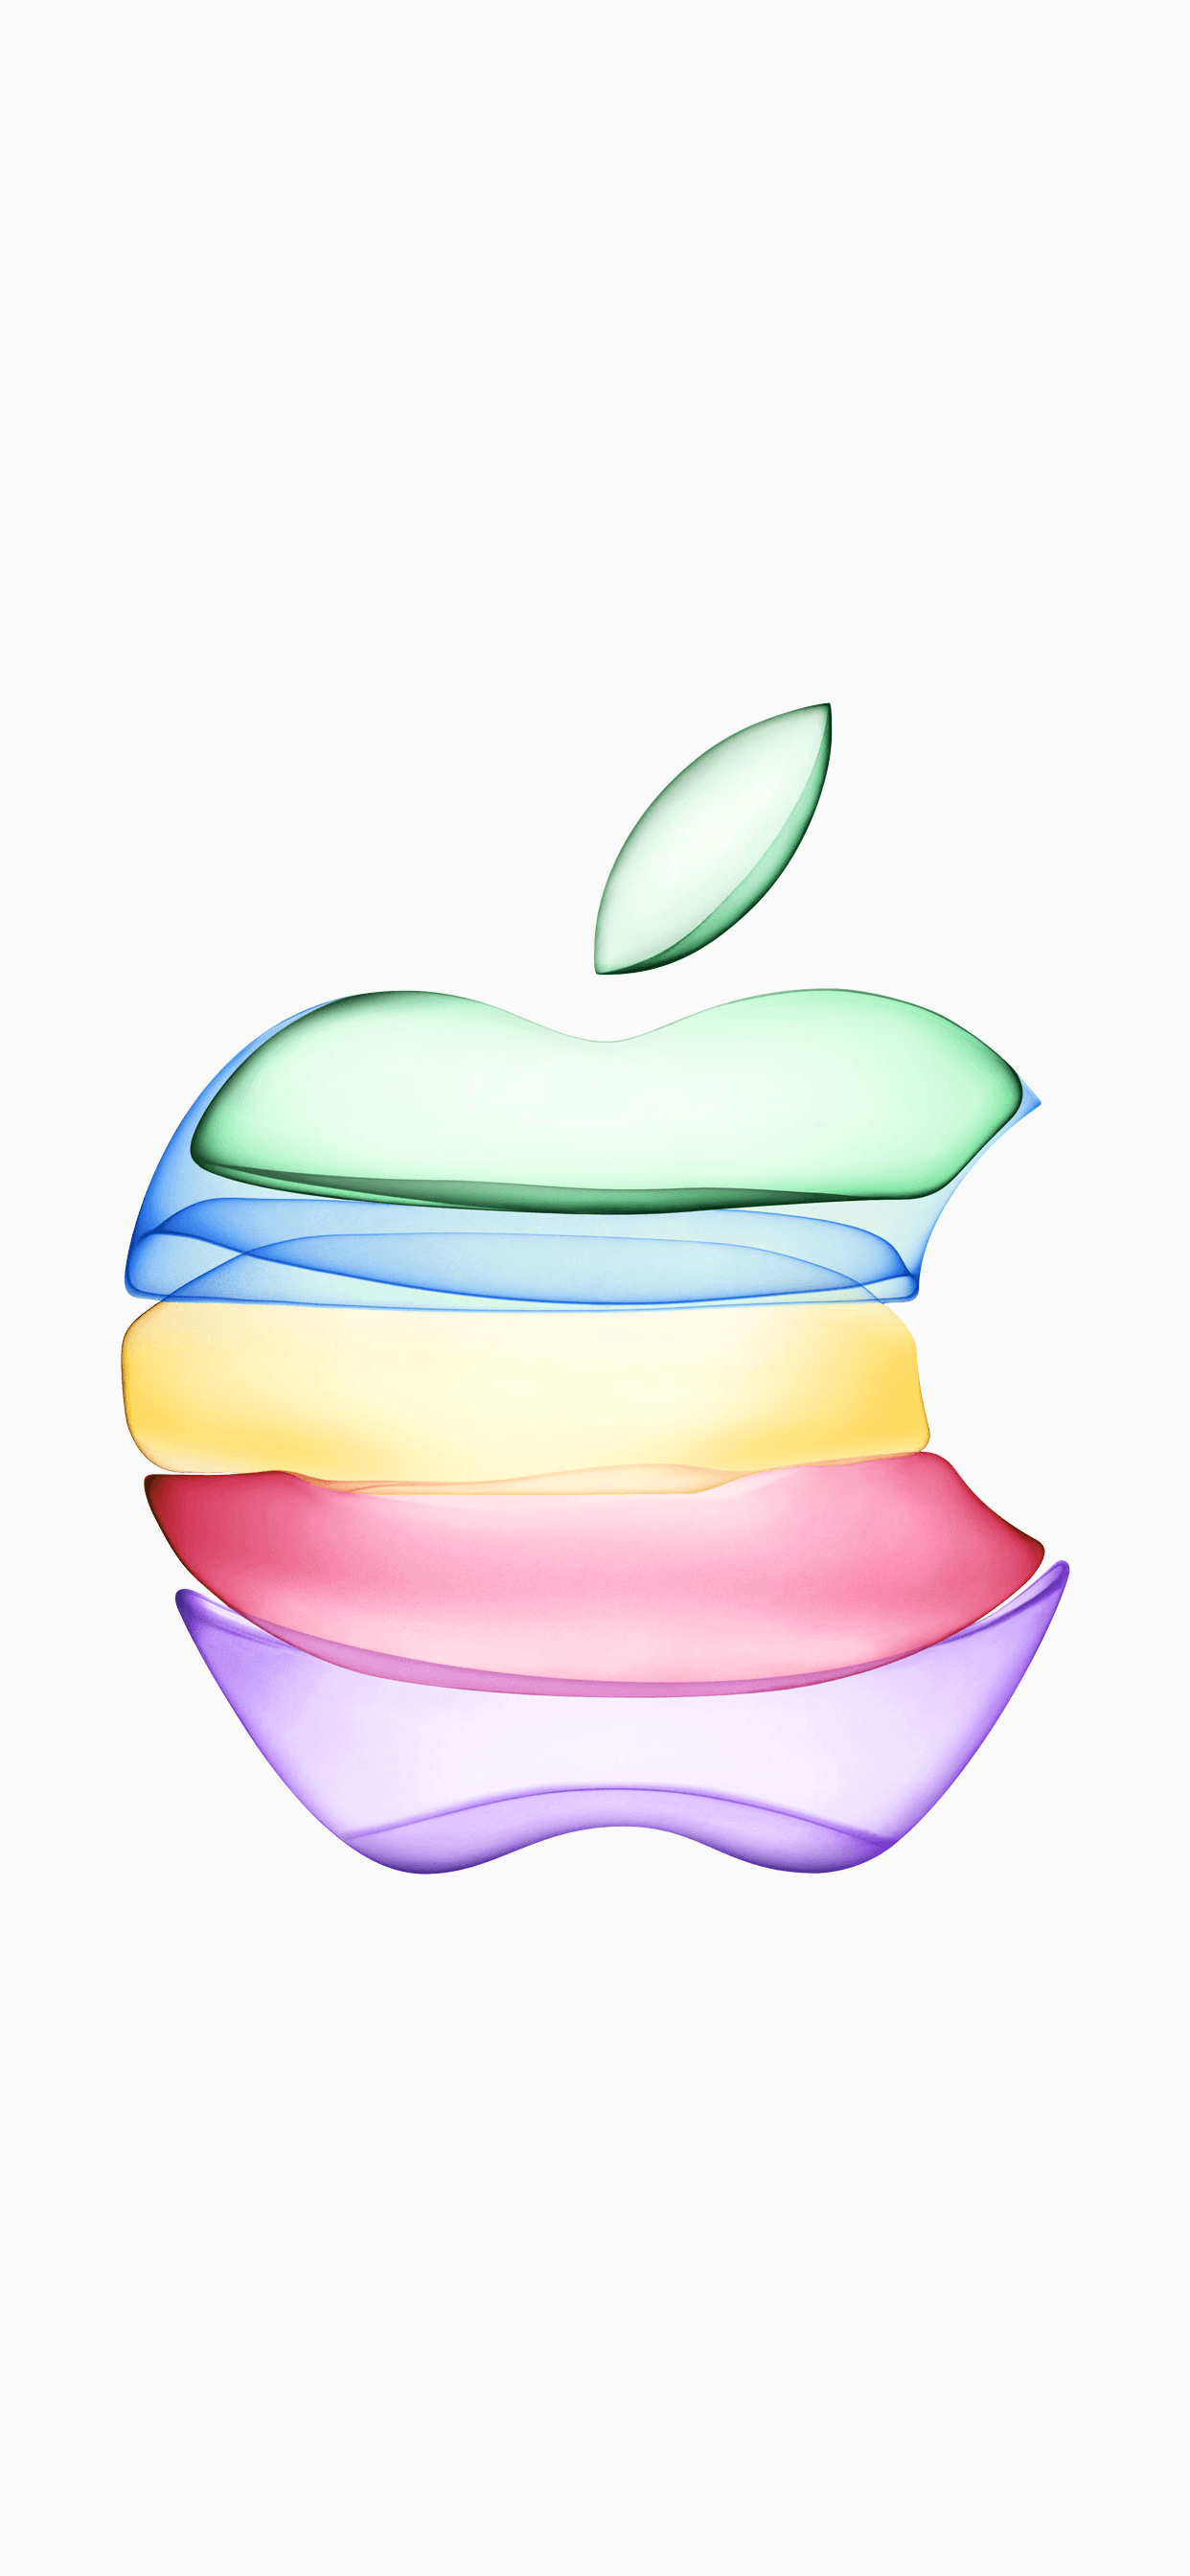 Apple's September Special Event Wallpaper for iPhone and iPad